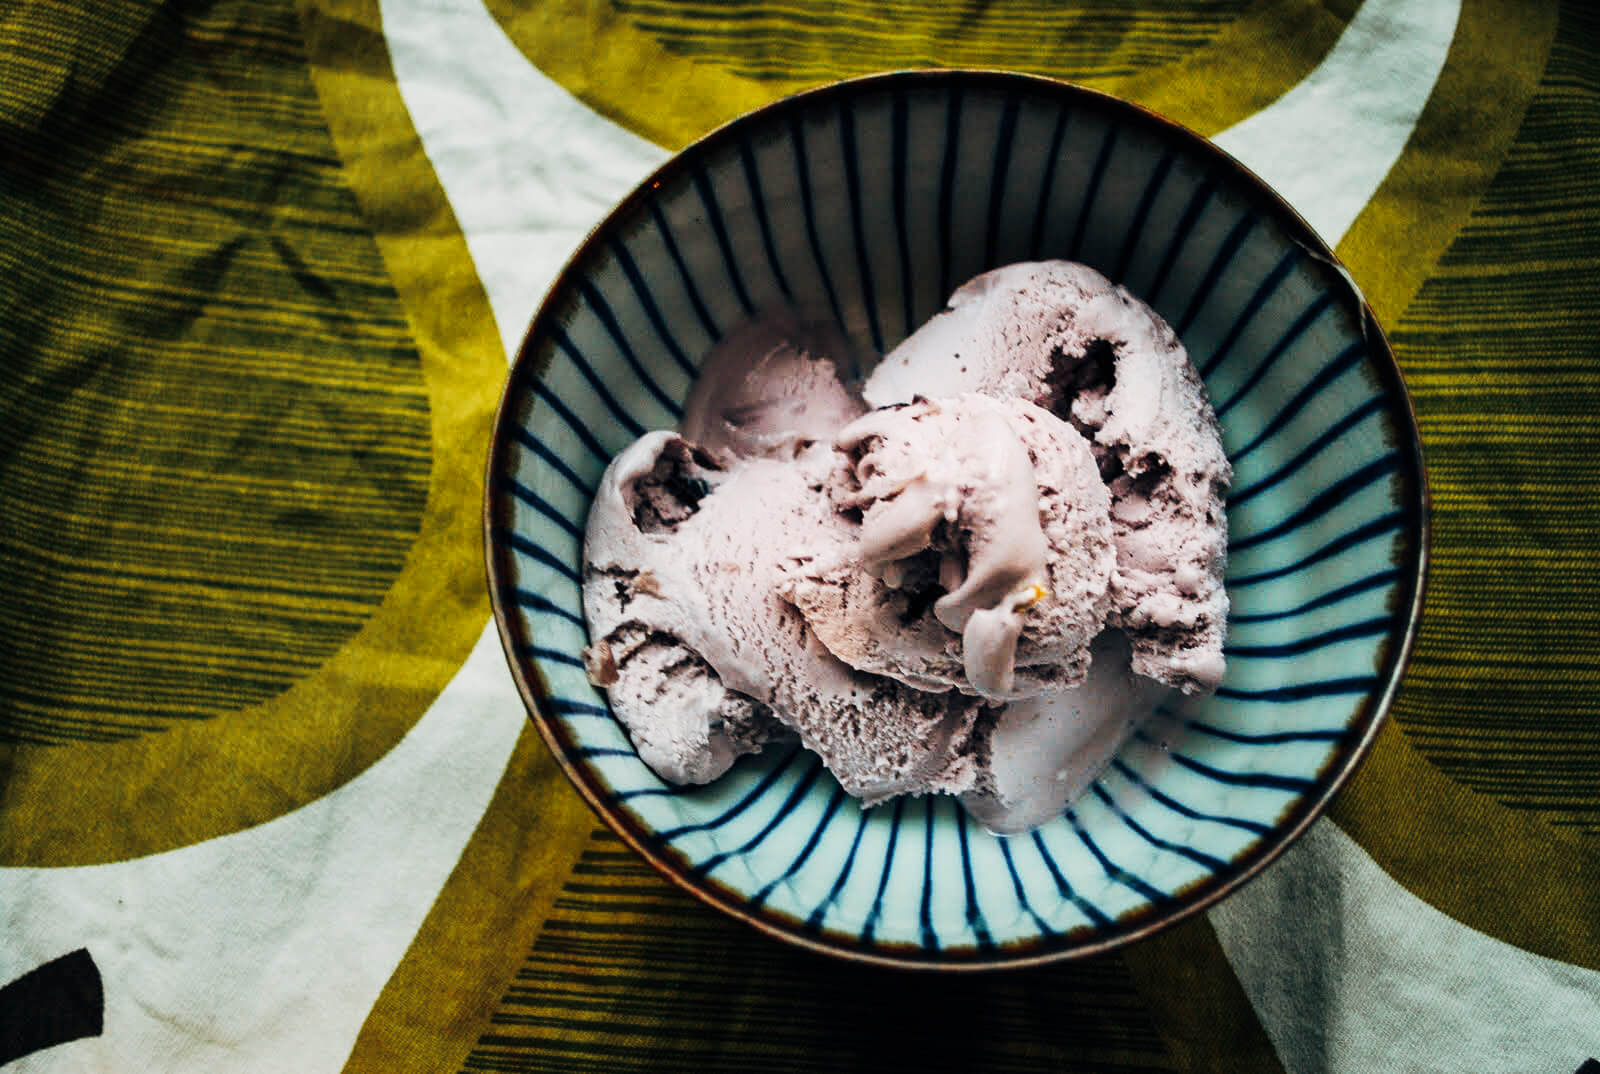 This homemade concord grape ice cream recipe captures the essence and bold flavors of concord grapes beautifully. 